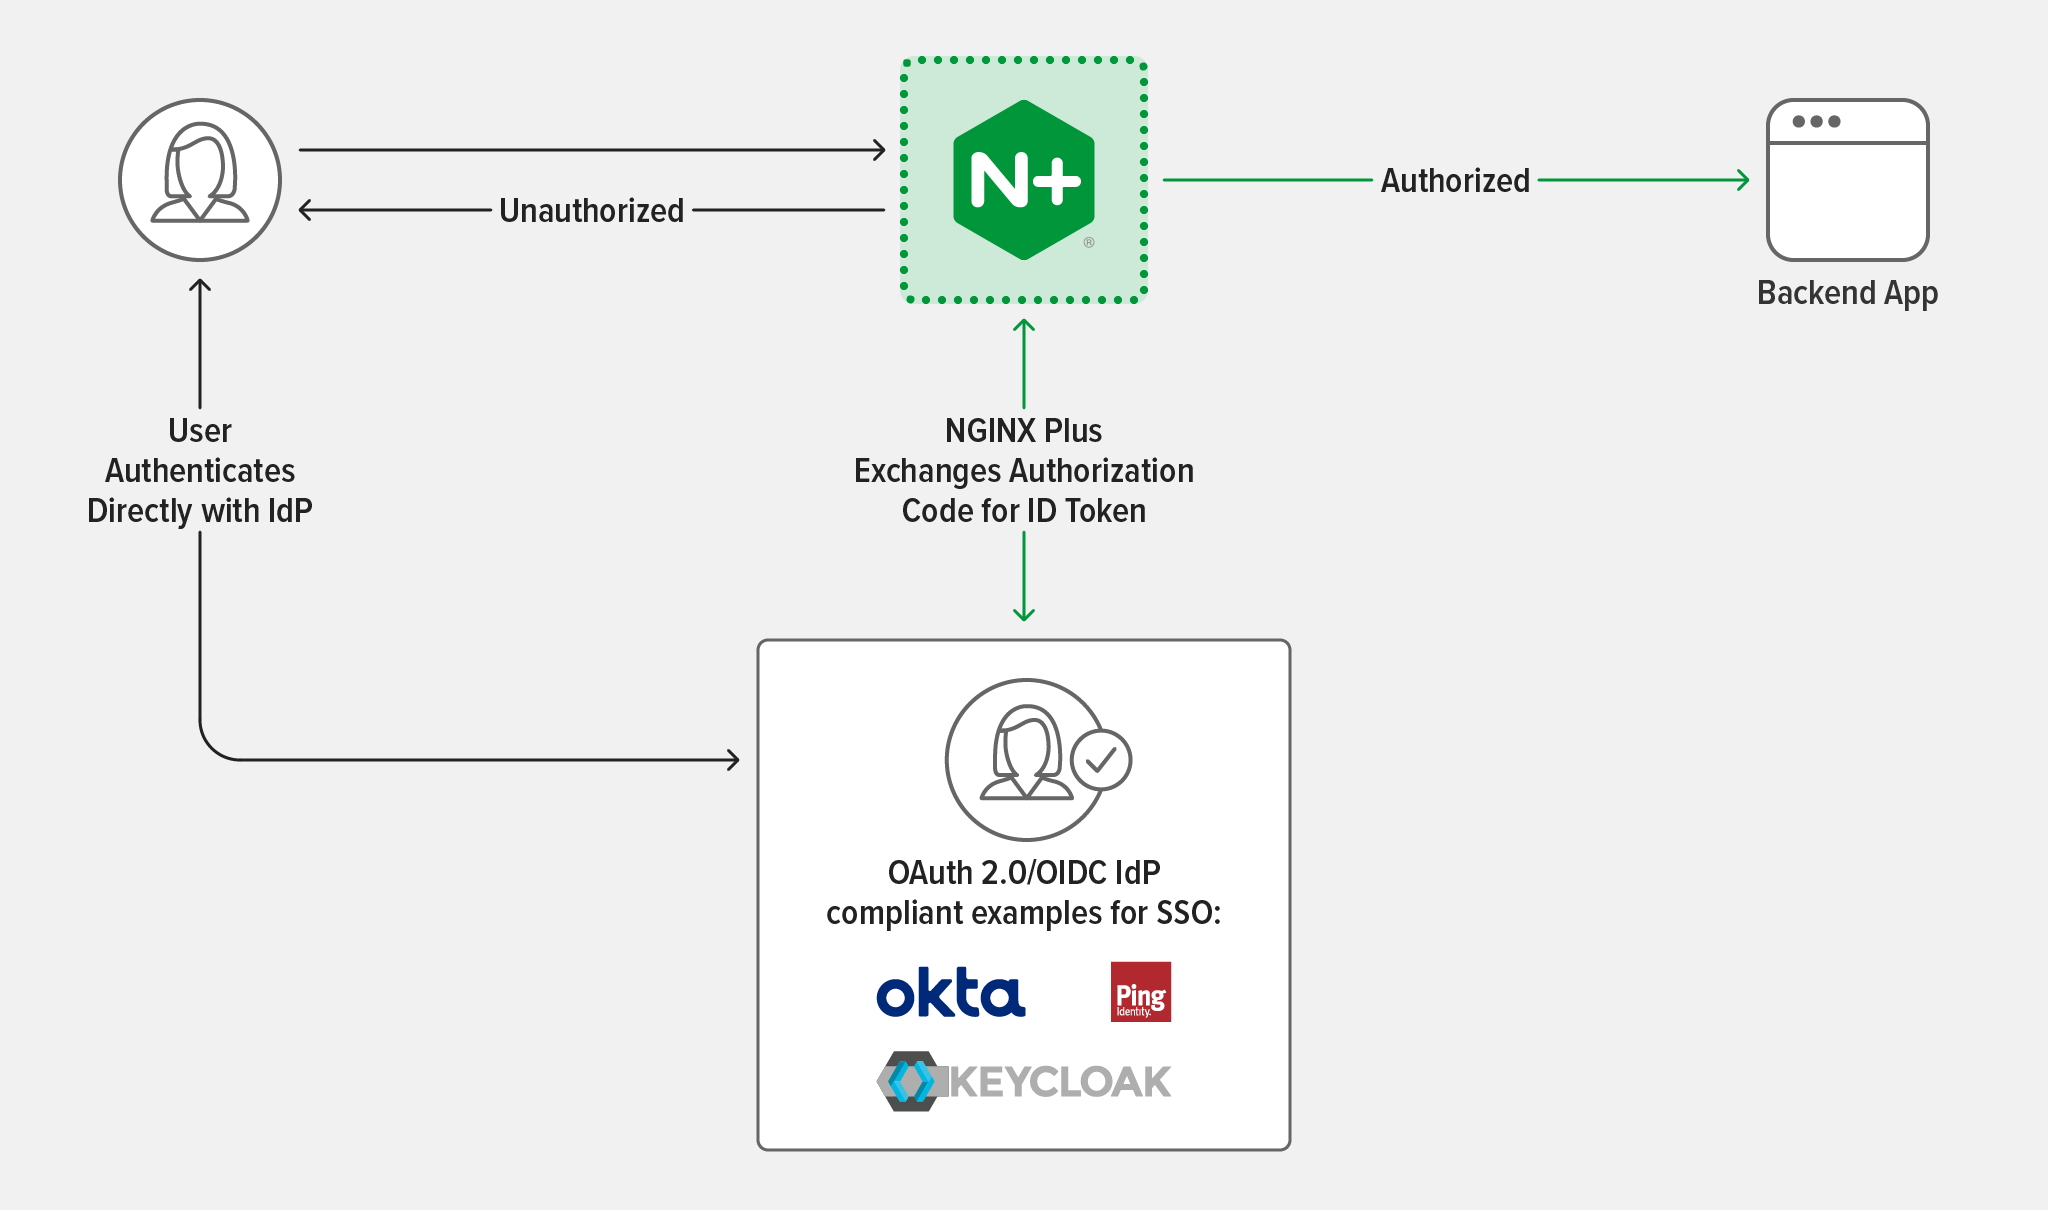 Authentication and authorization using NGINX Plus and OAuth 2.0/OIDC IdP-compliant examples for SSO